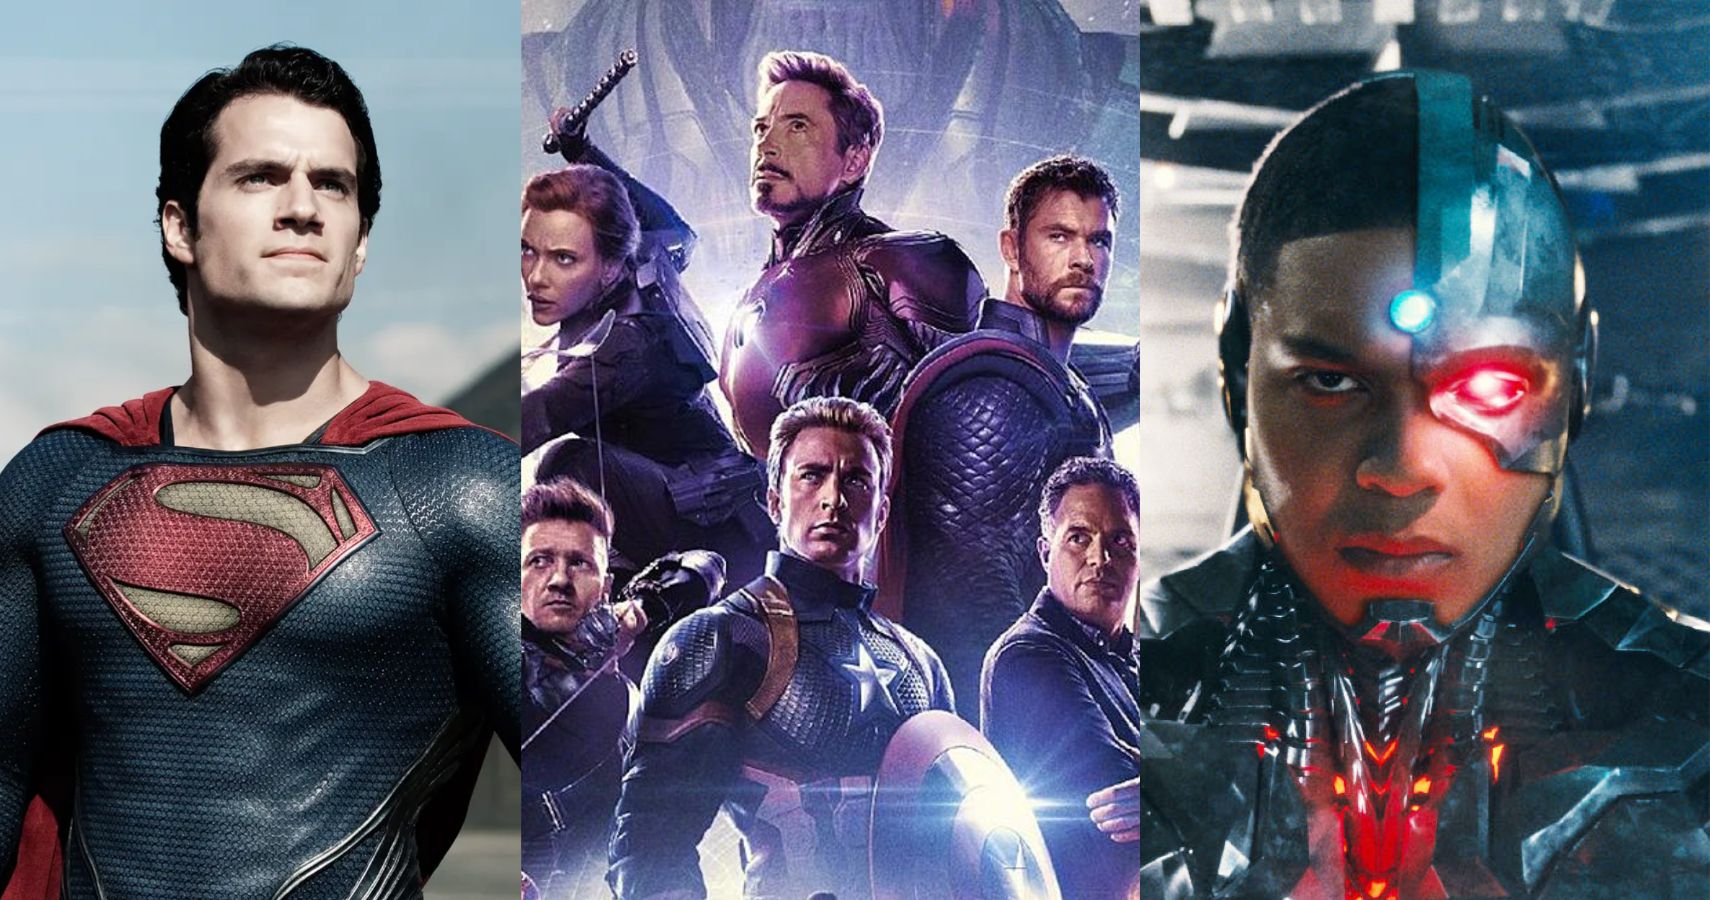 A combined feature image featuring Henry Cavill and Ray Fisher next to several actors from the MCU on a poster for Avengers: Endgame.